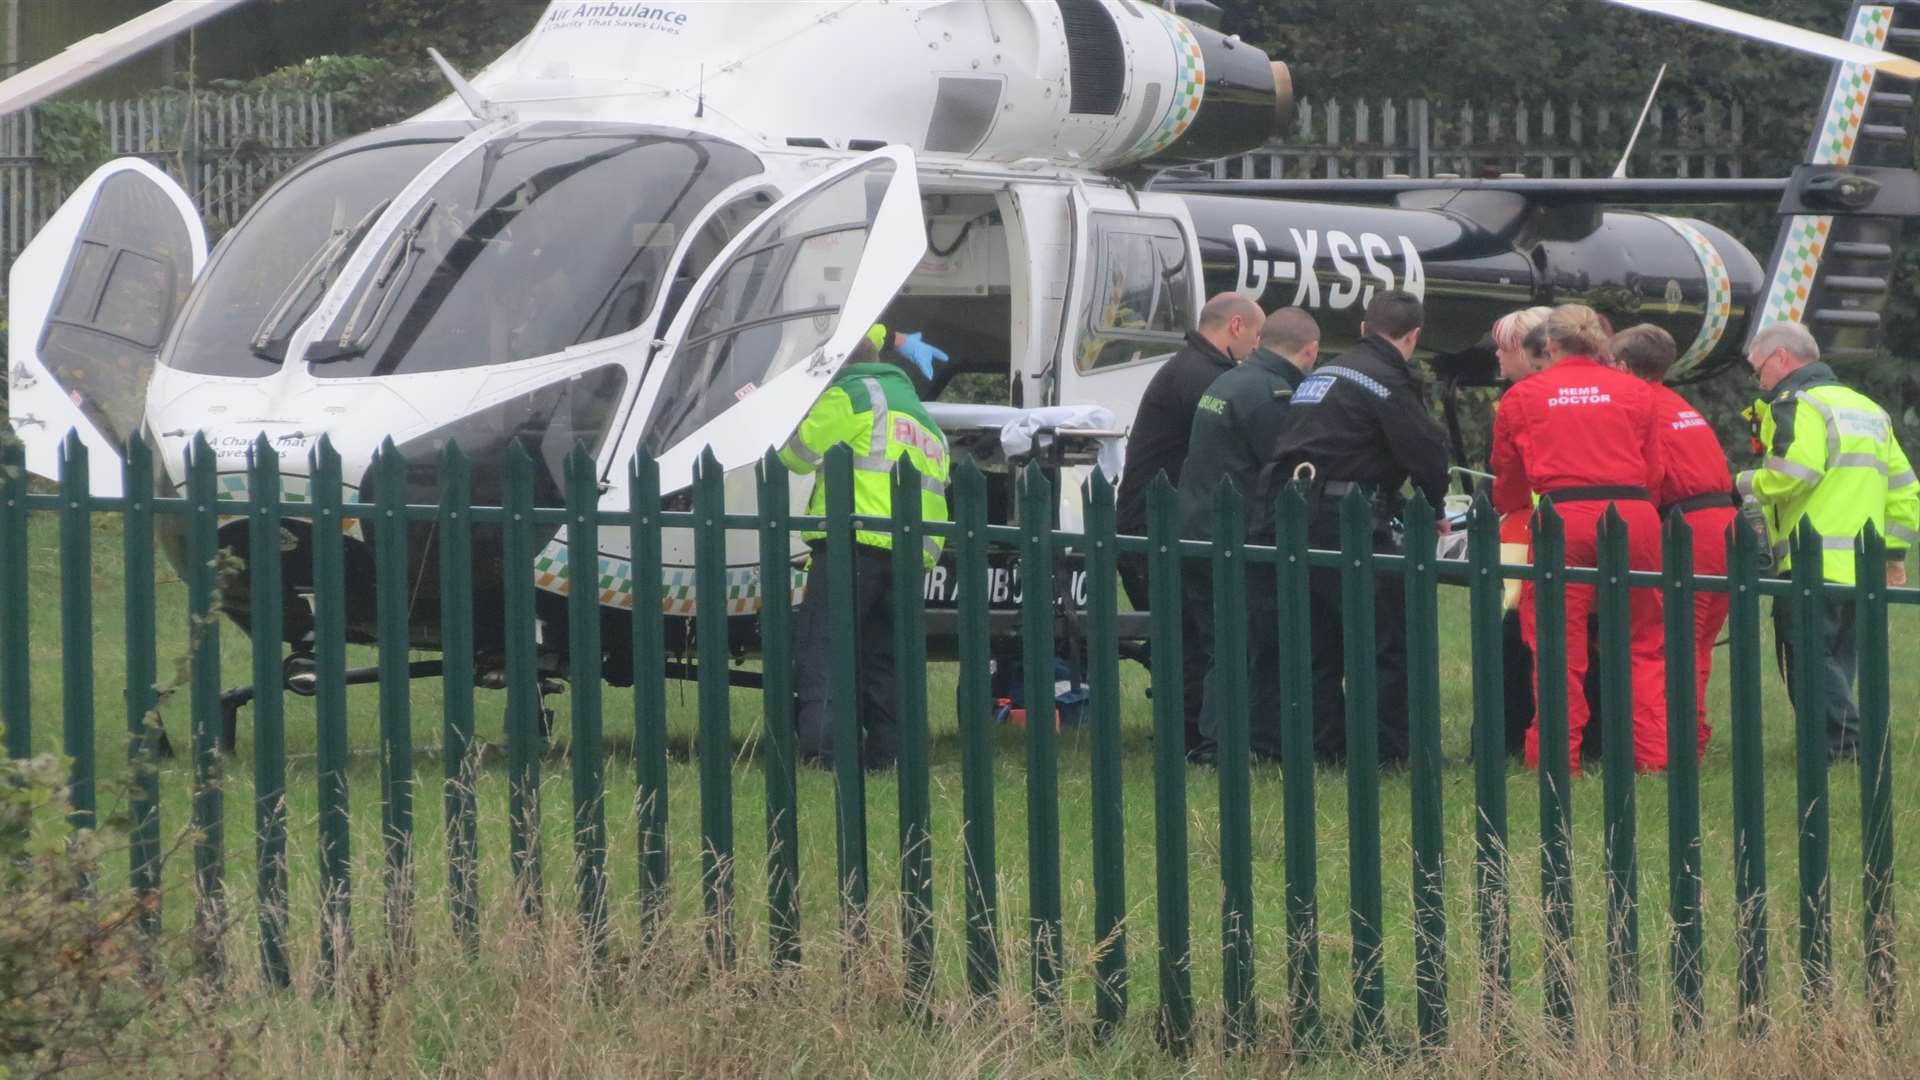 The boy has been flown to hospital